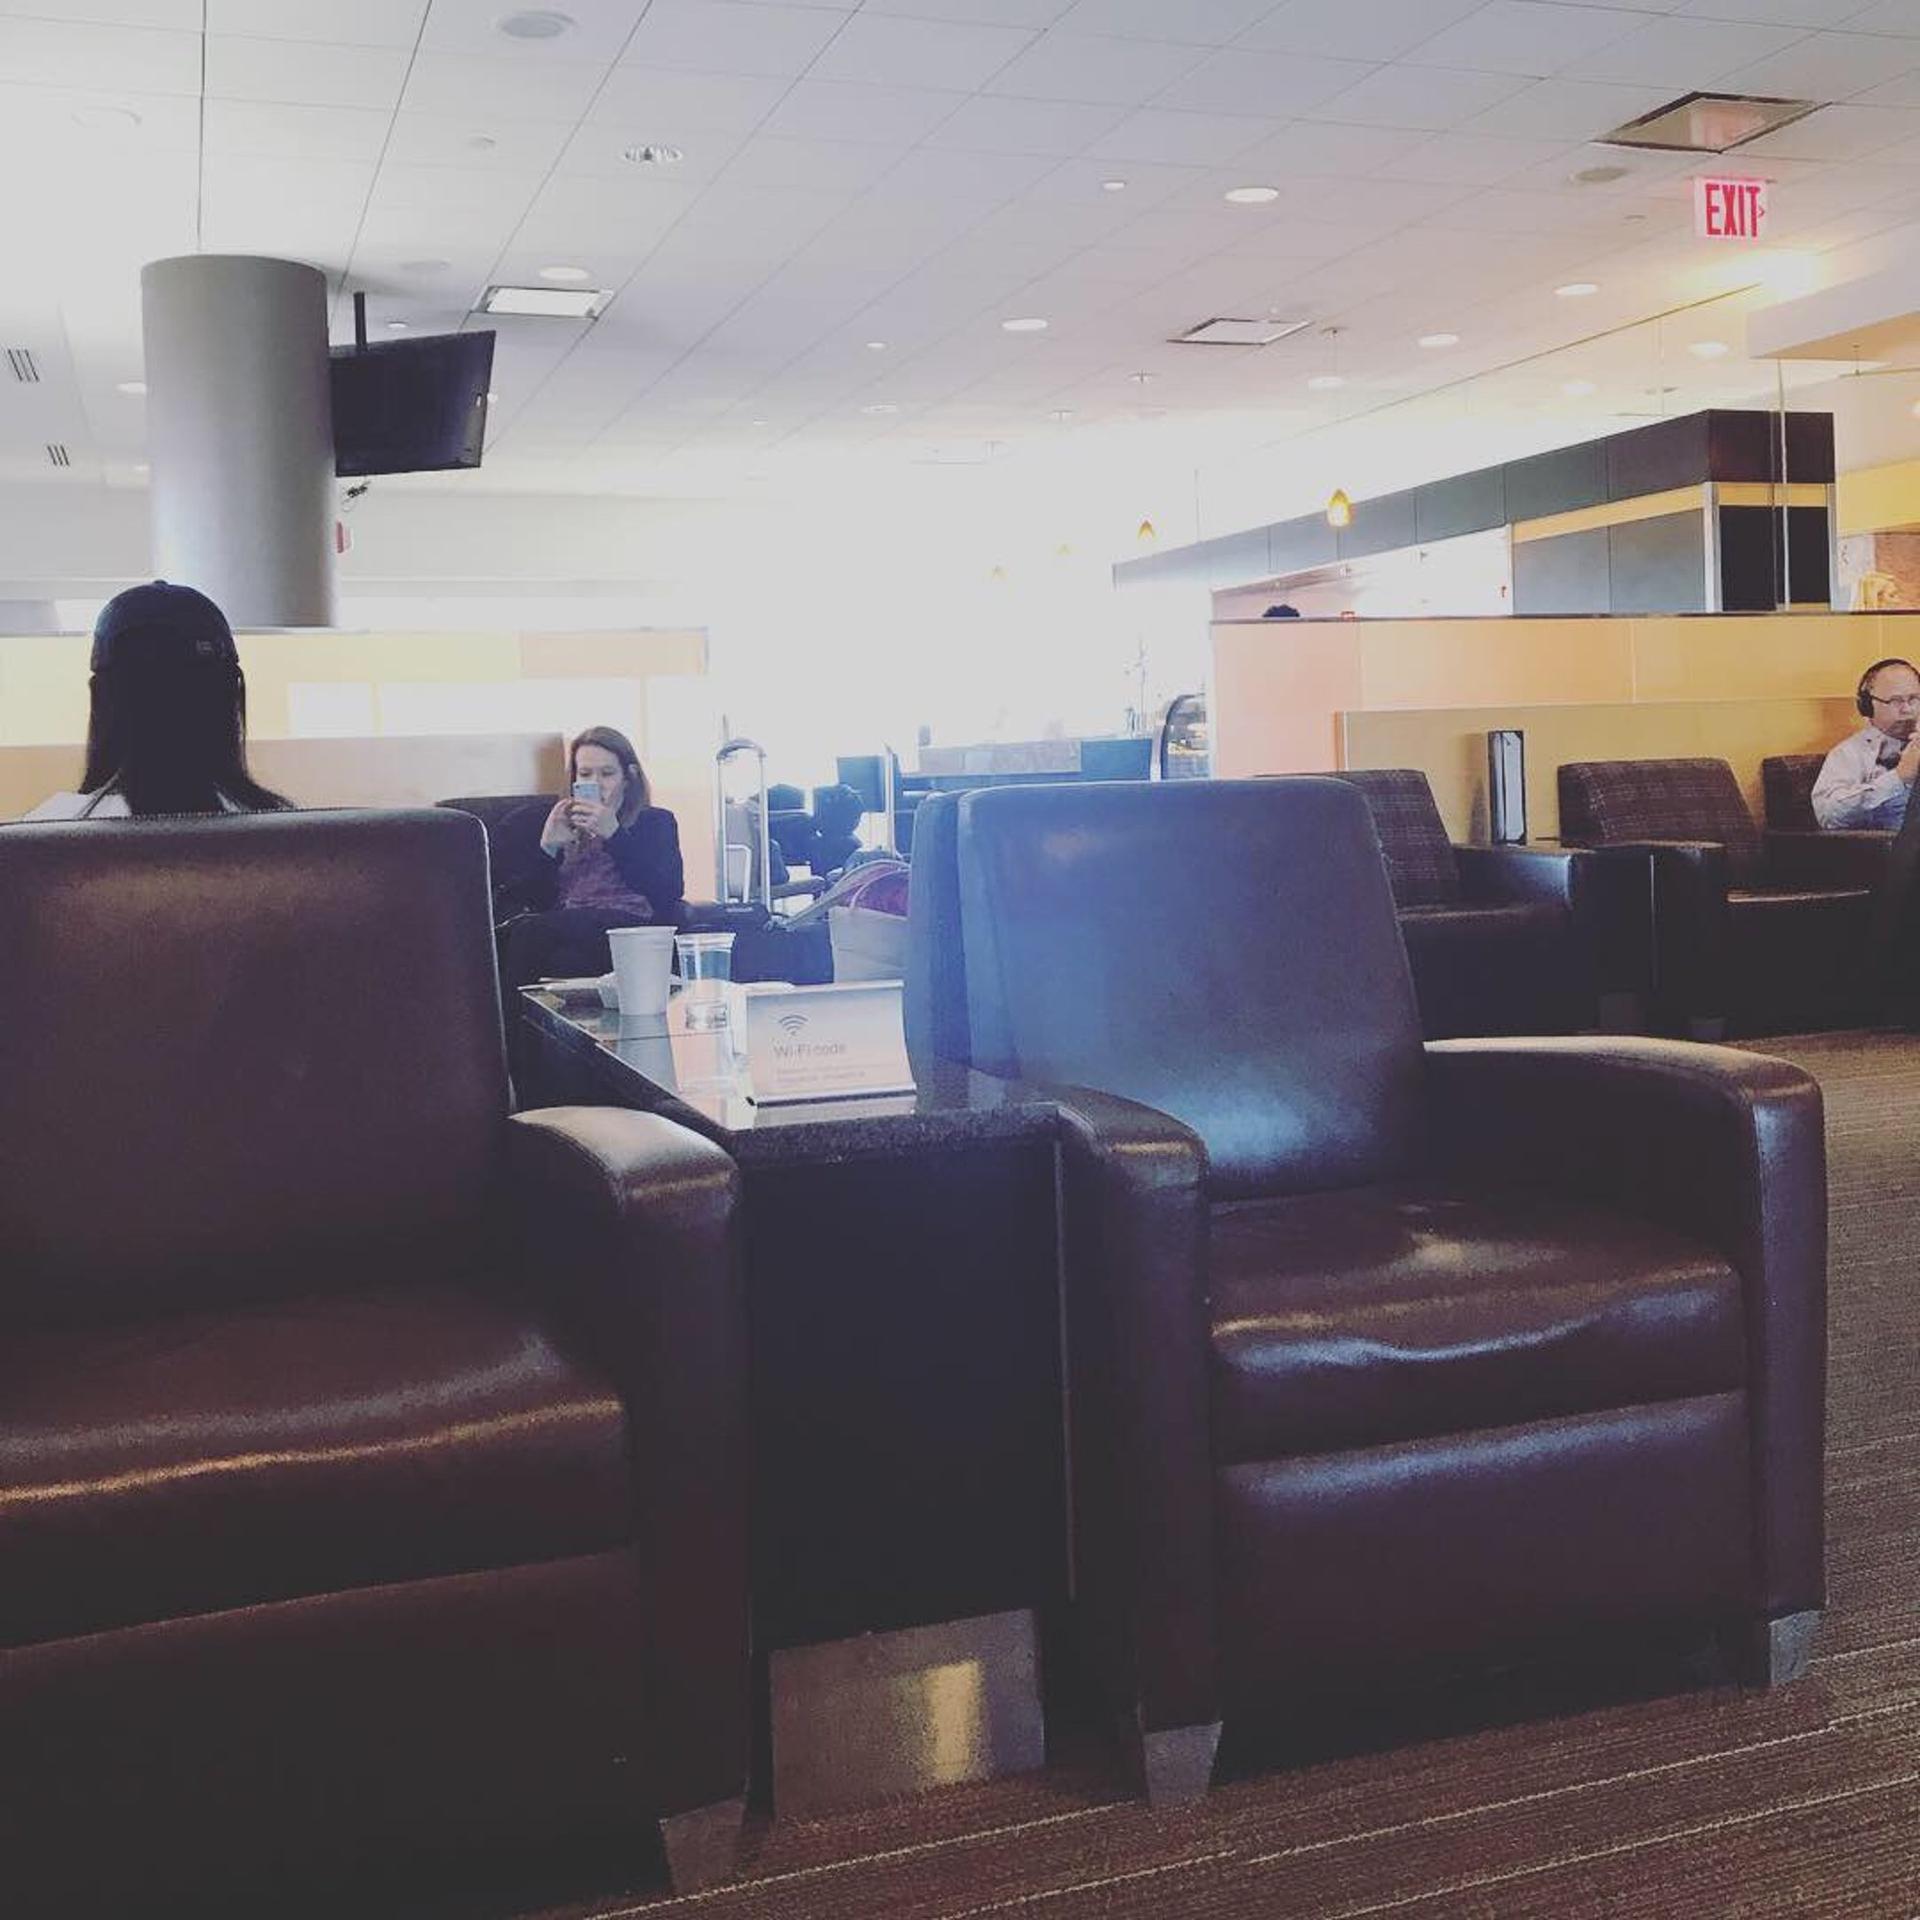 American Airlines Admirals Club image 15 of 25